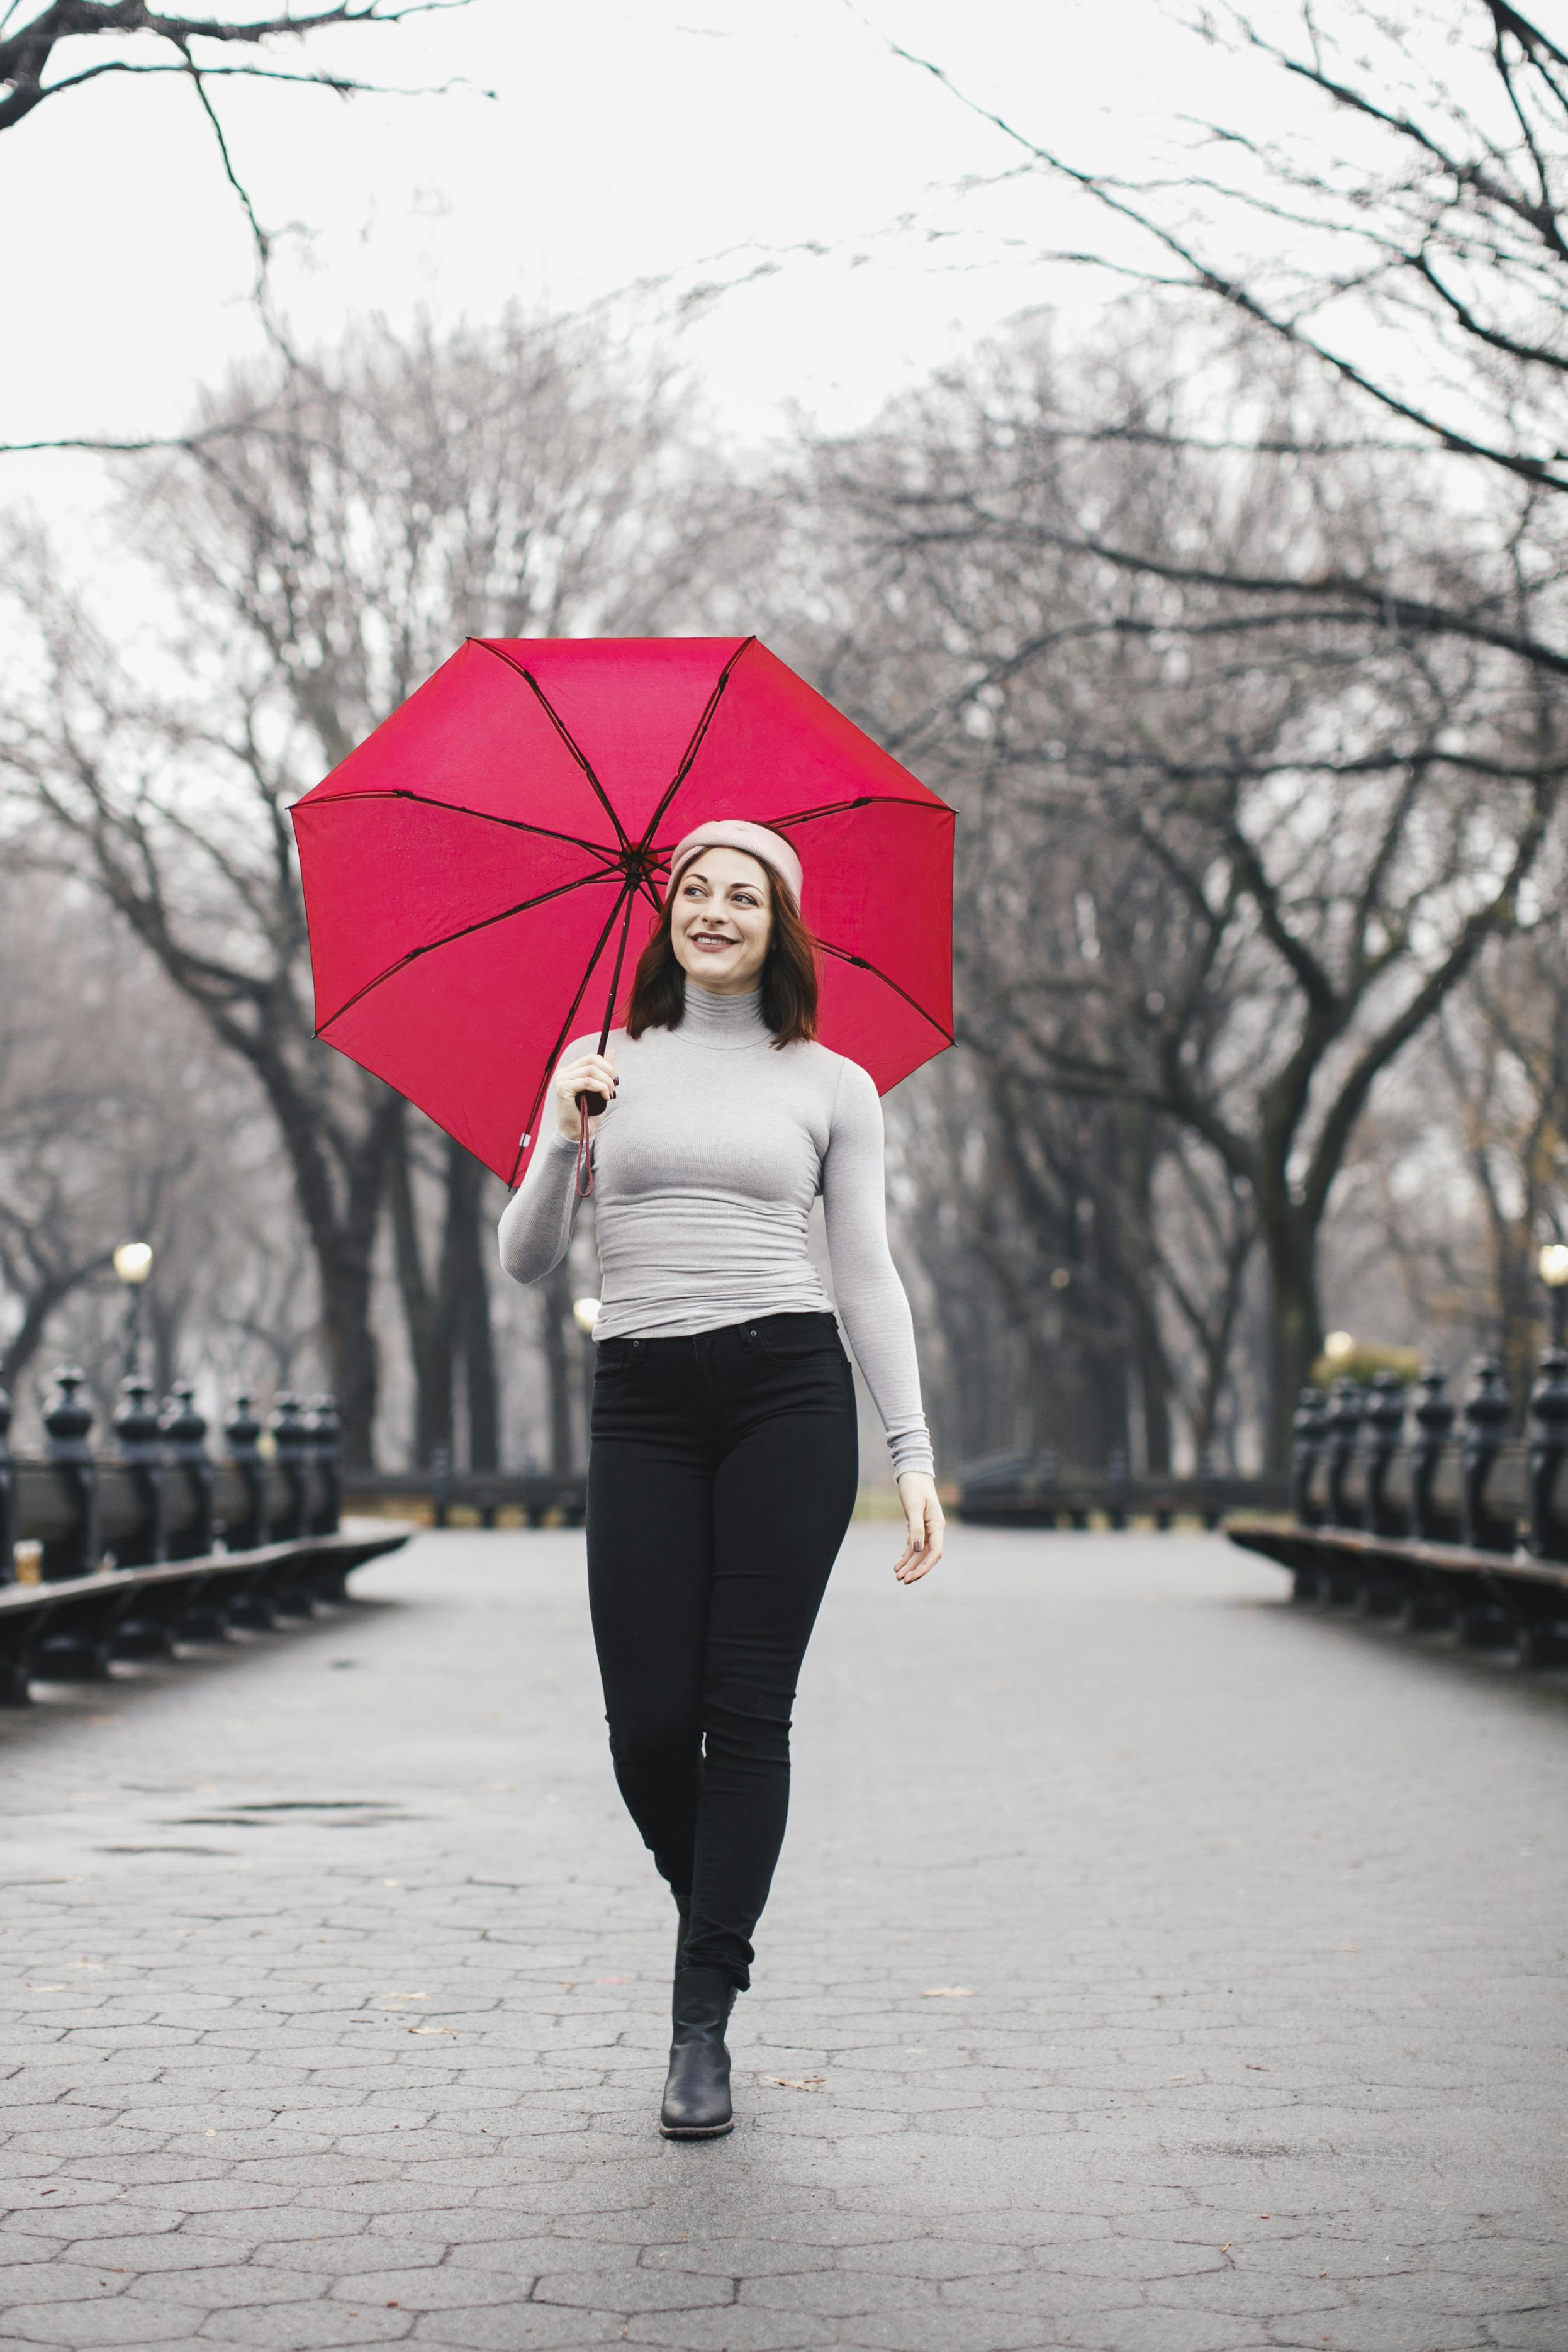 A woman walking with a red umbrella in a park.